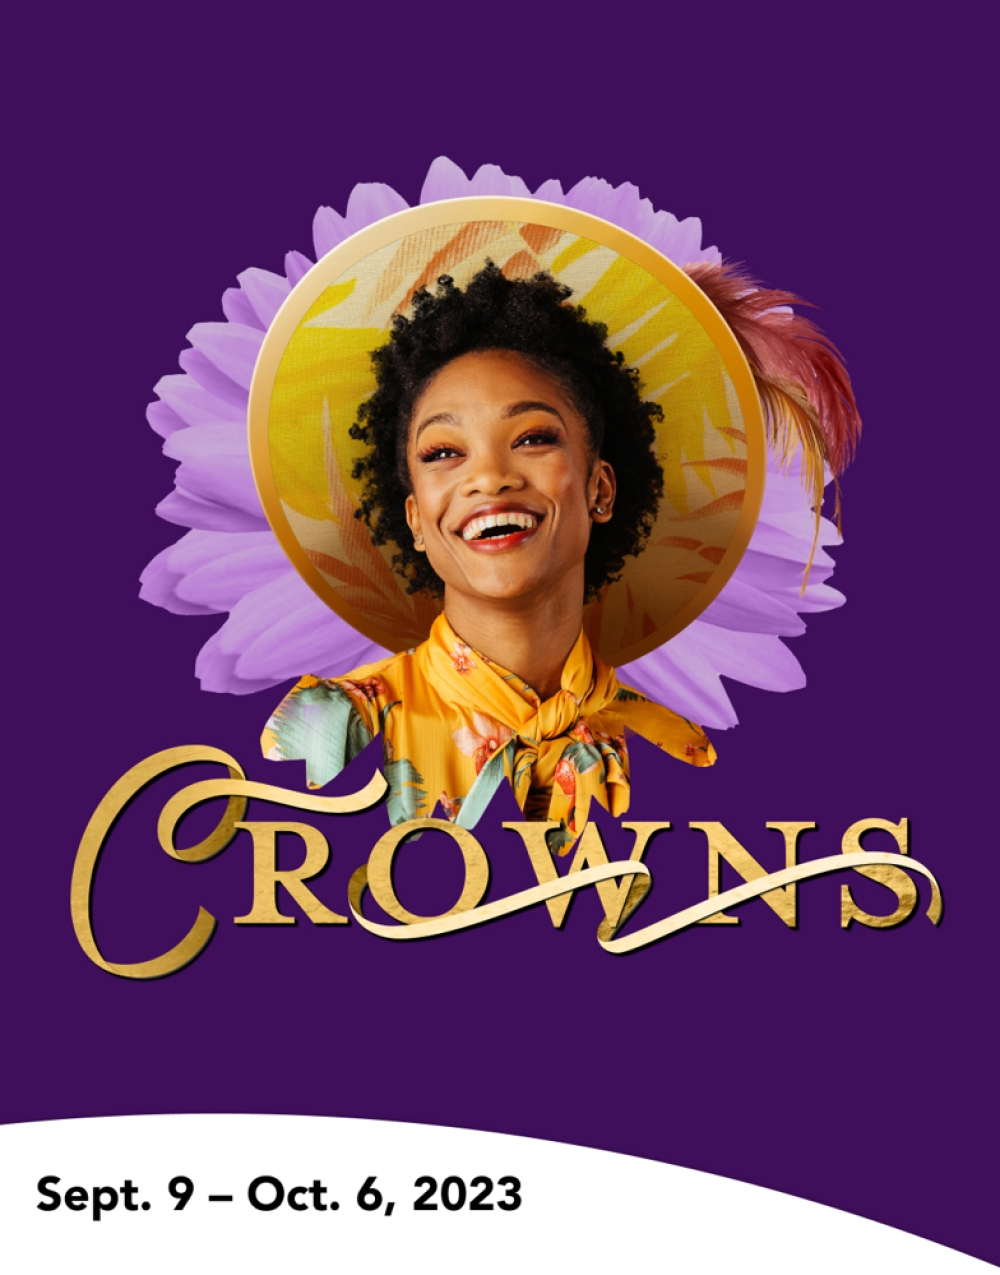 Crowns at Lesher Center for the Arts